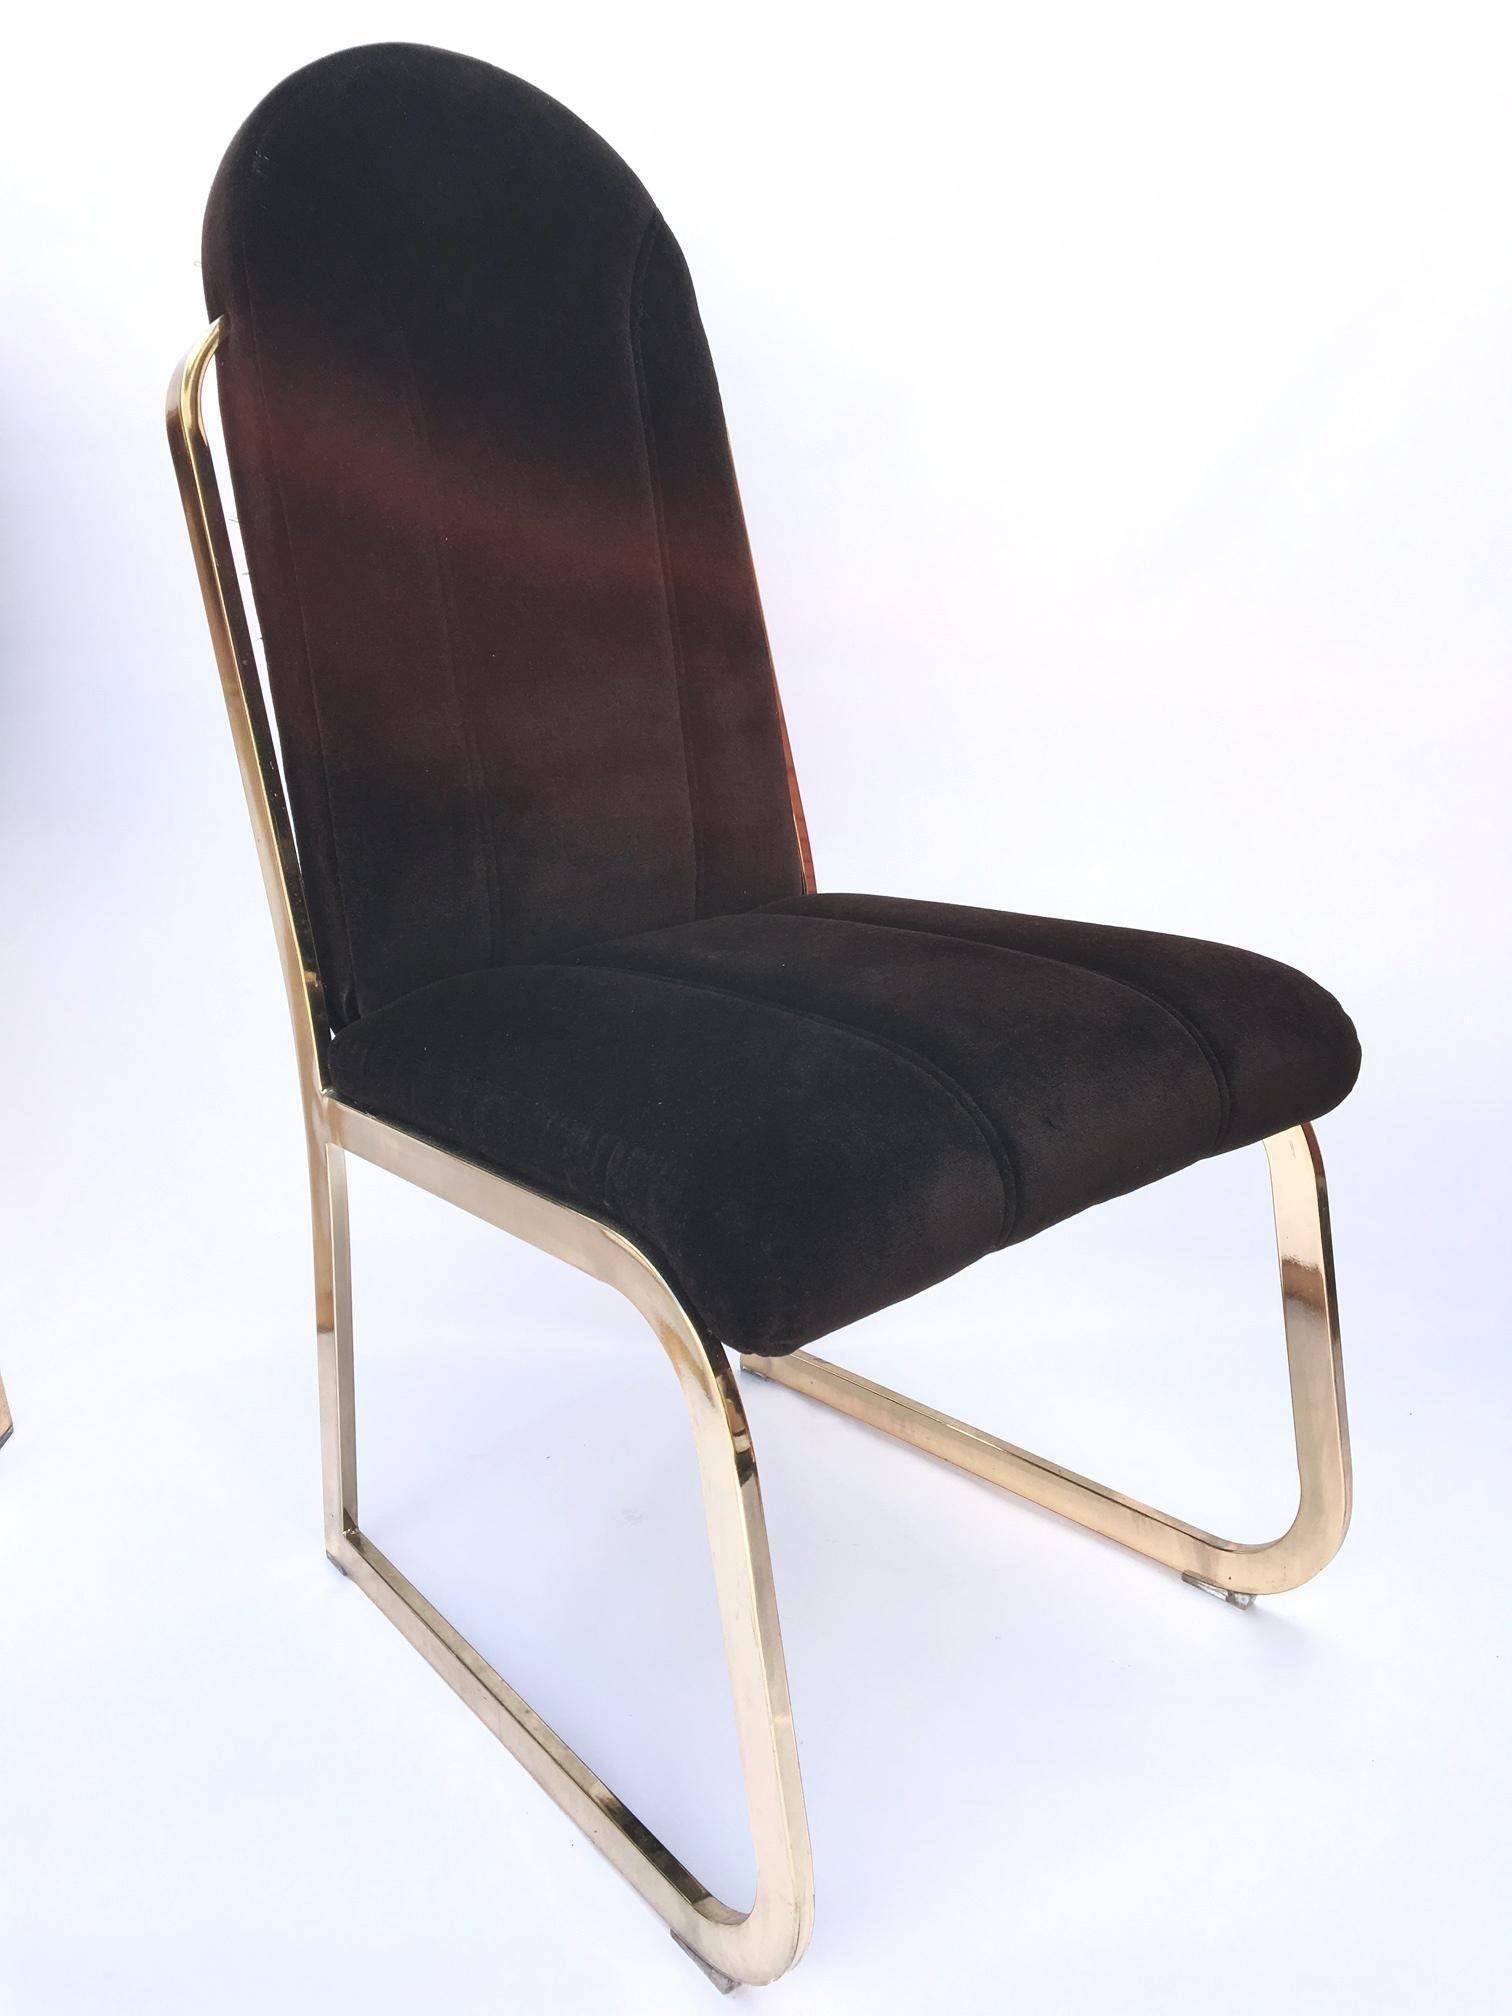 Set of six vintage Chromcraft dining chairs in the manor of Milo Baughman feature a heavy brass frame and brown velvet upholstery. Thick and comfortable seat and back with accent stitching. Excellent vintage condition. Brass has minor marks